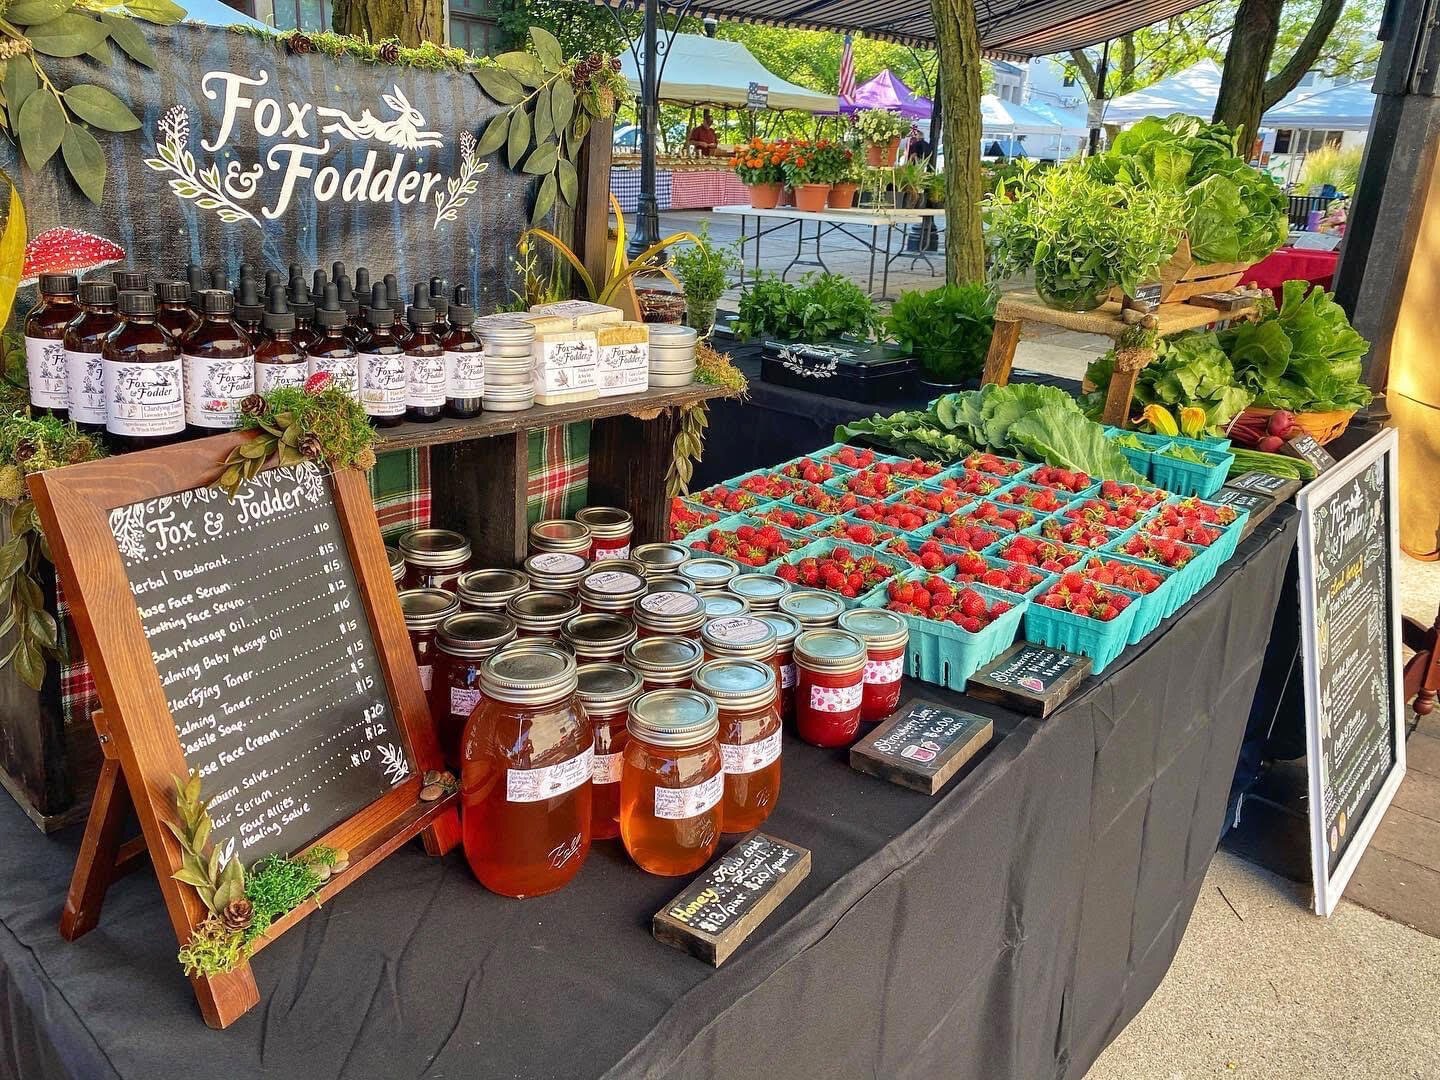 Fox and Fodder's display at the YLNI Farmer's Market.